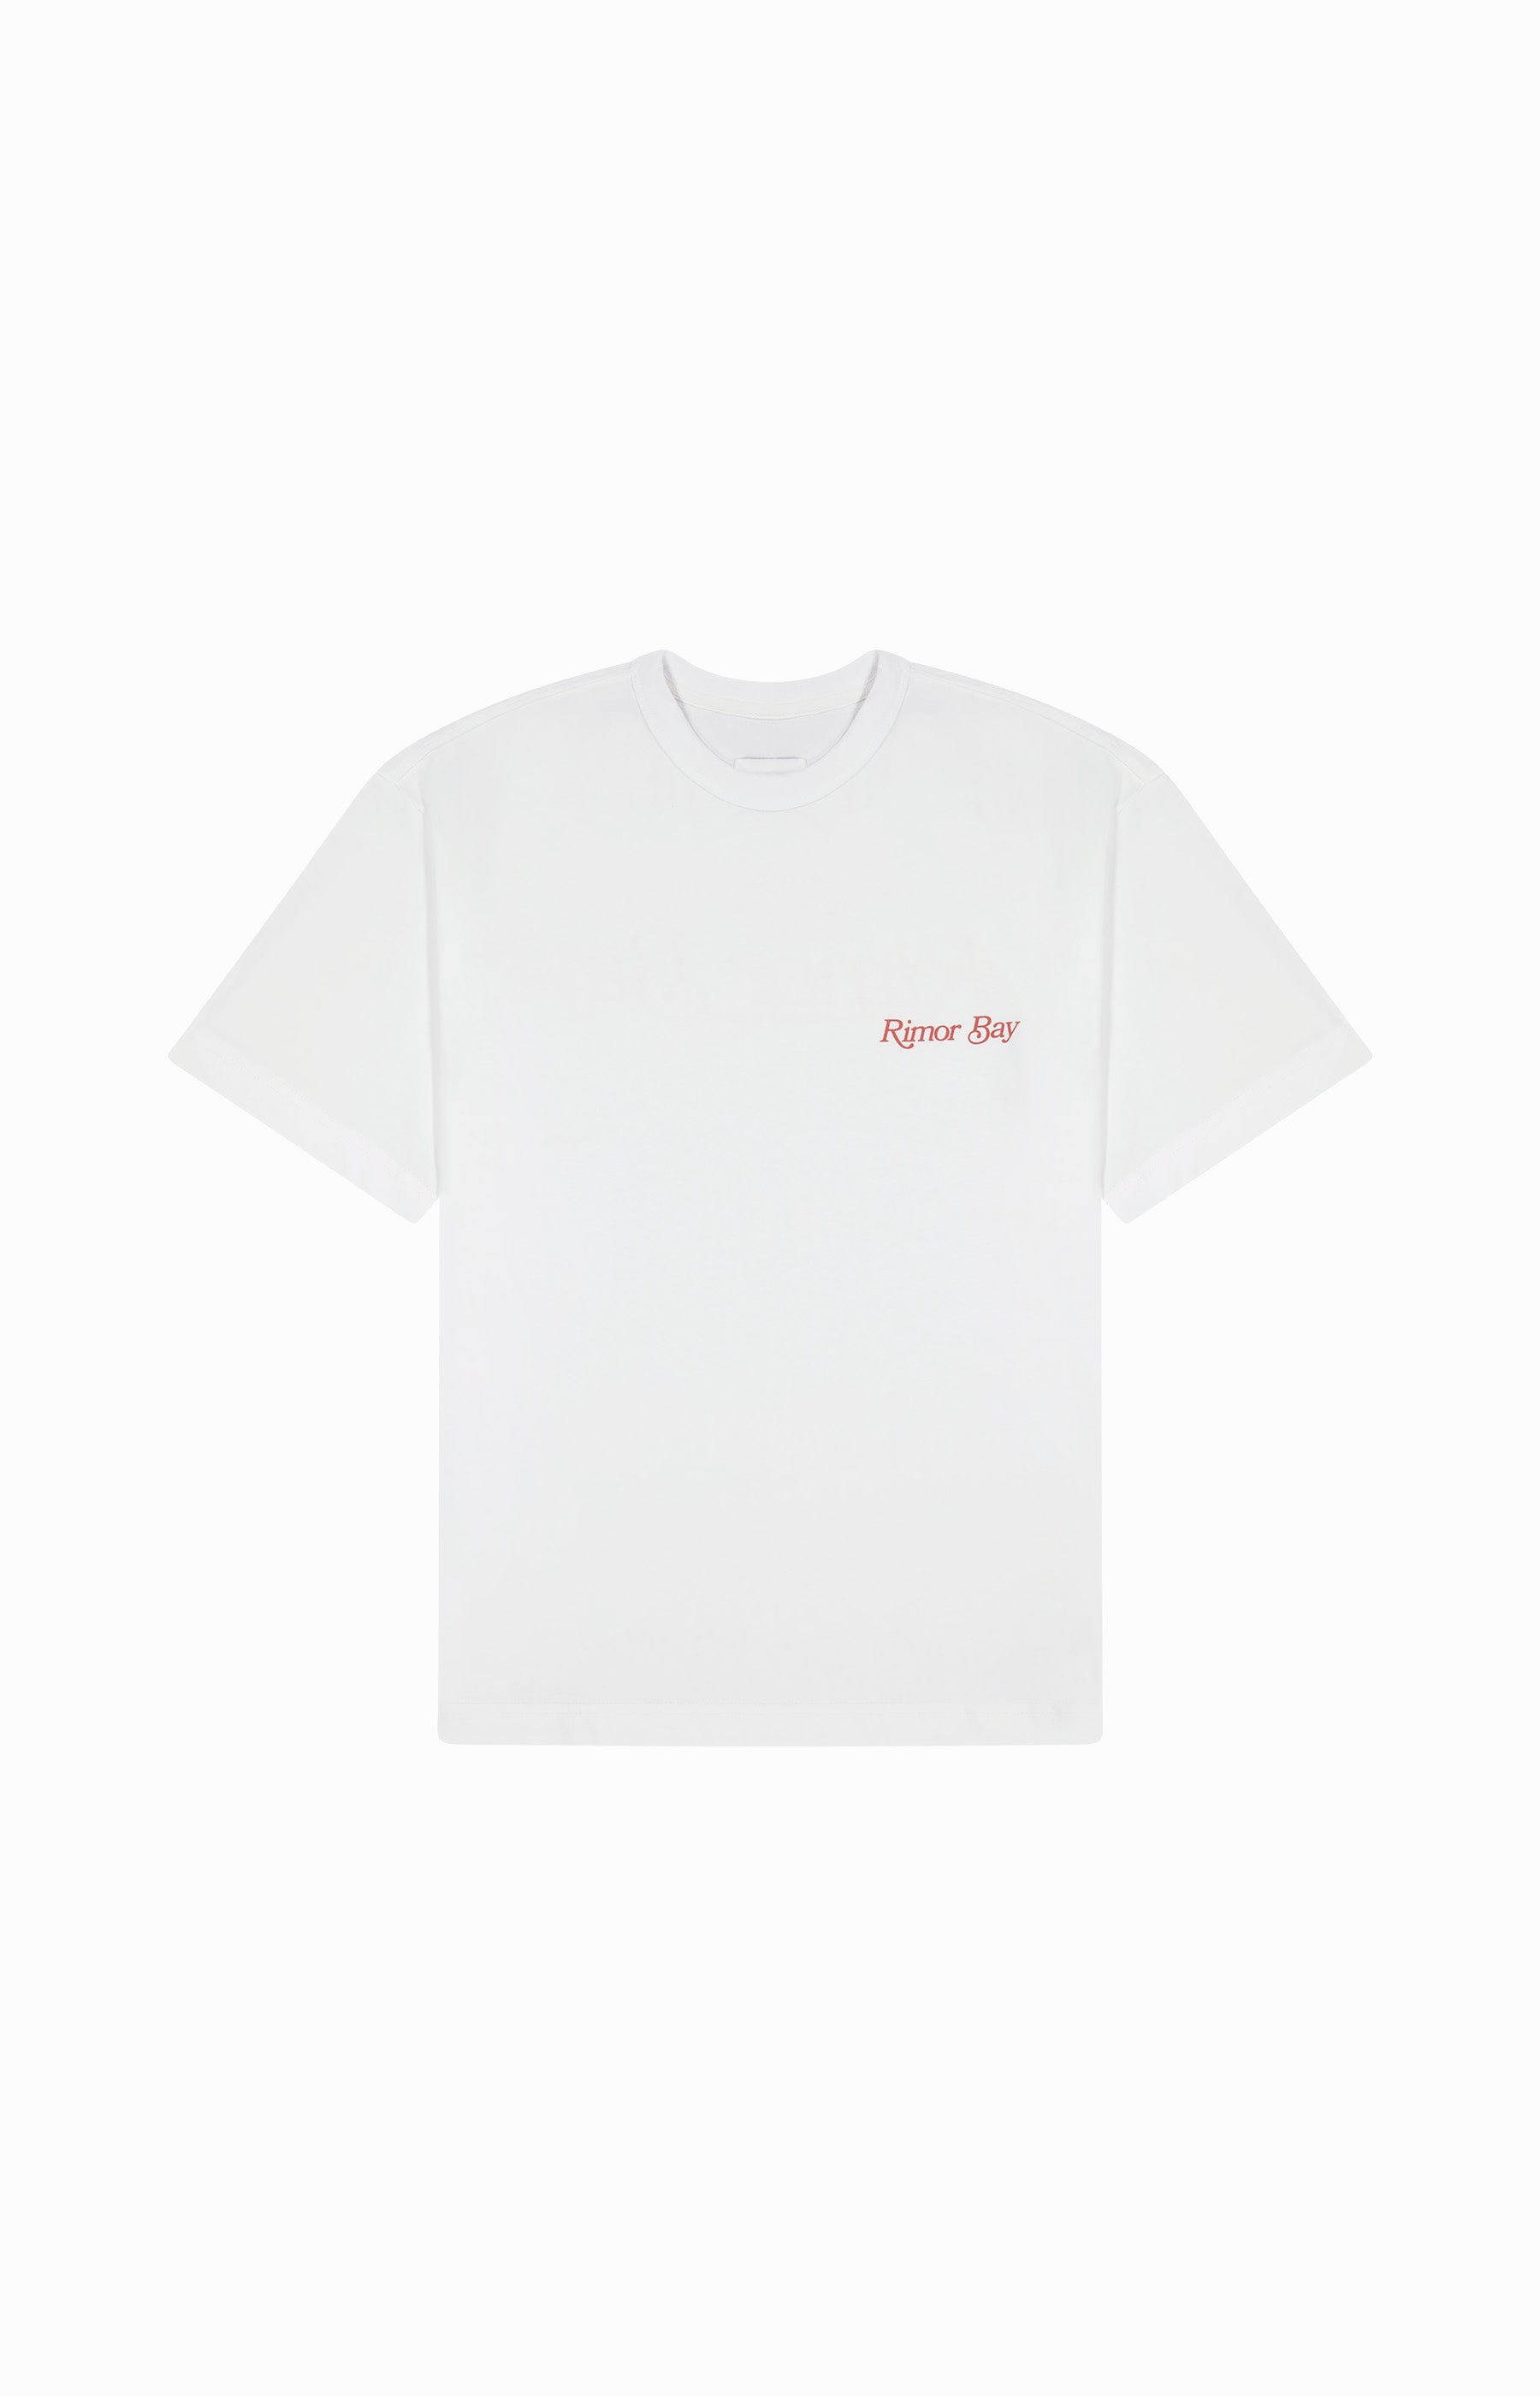 white short sleeve tshirt with logo on chest 